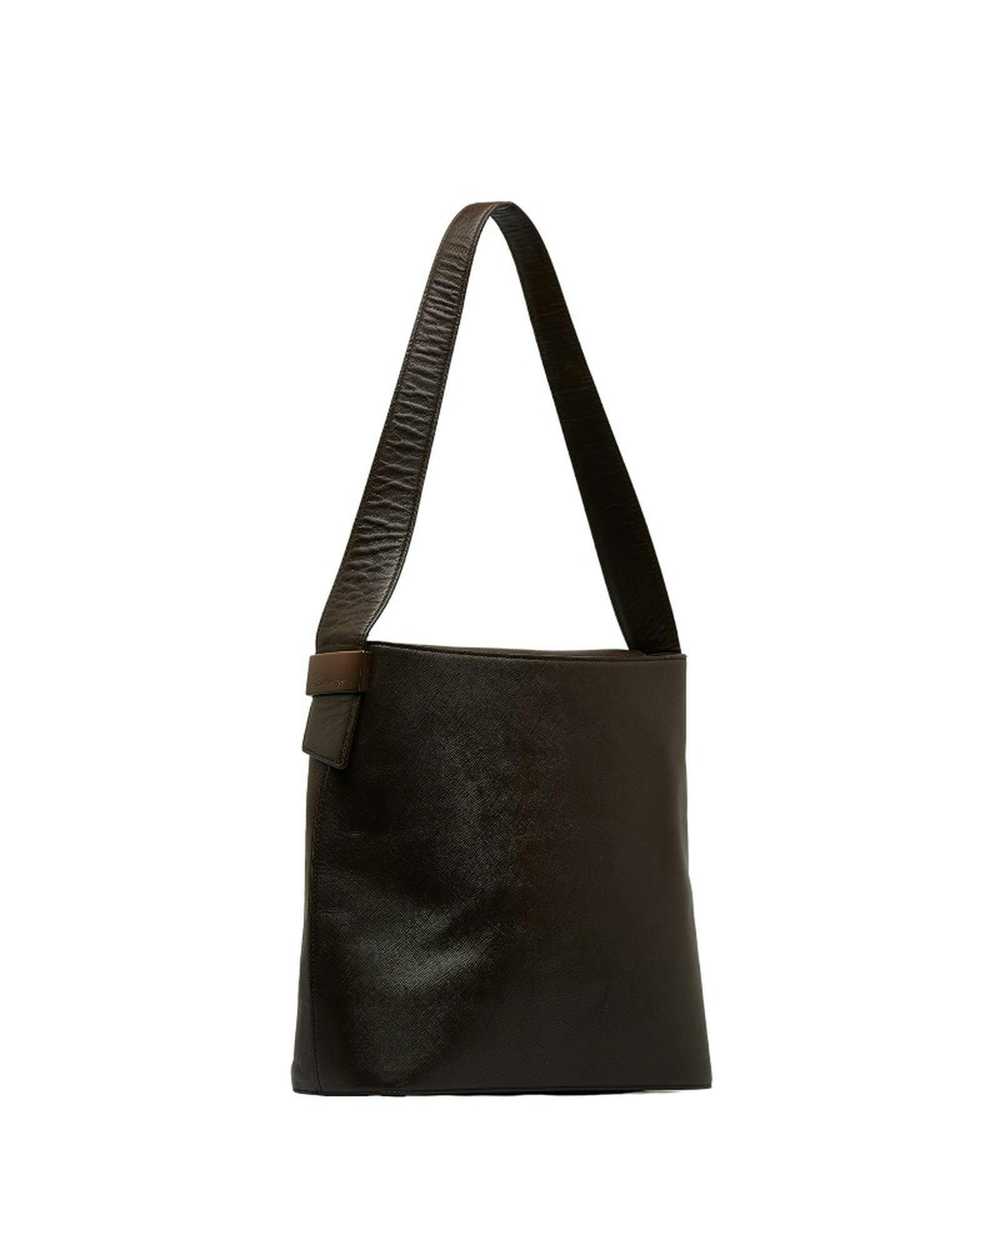 Burberry Brown Leather Shoulder Bag in AB Conditi… - image 2